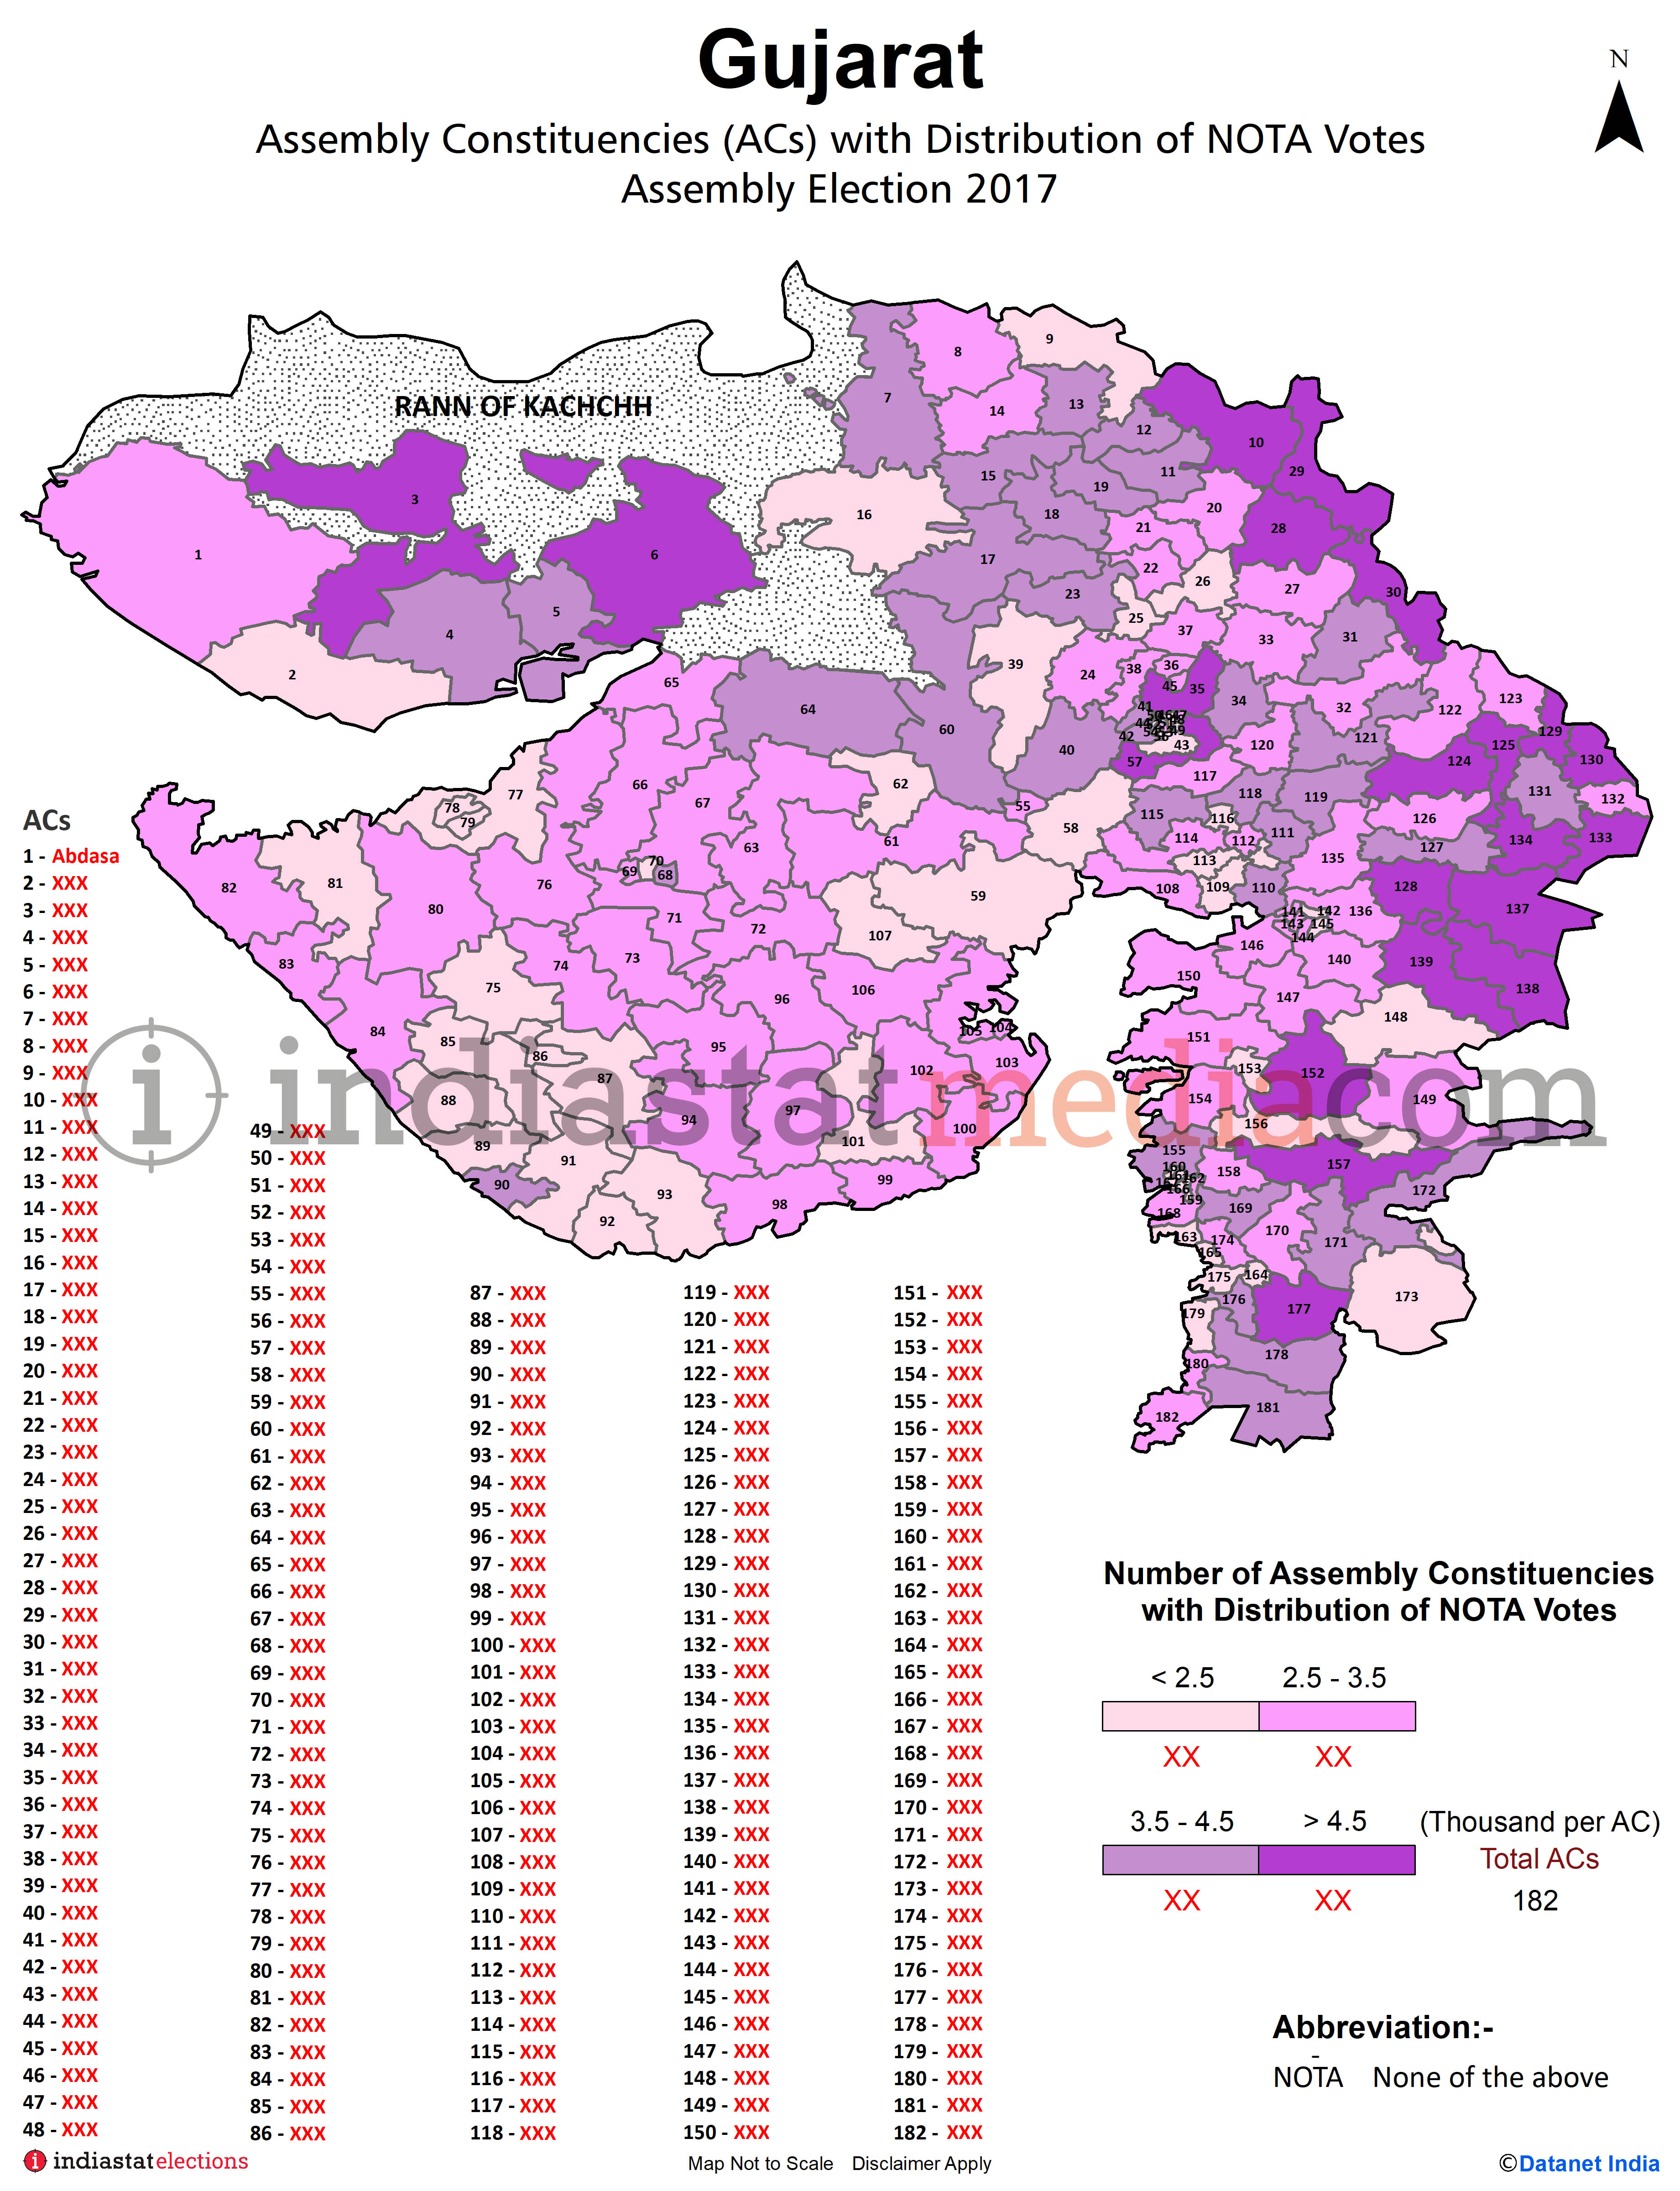 Assembly Constituencies (ACs) with Distribution of NOTA Votes in Gujarat Assembly Election - 2017